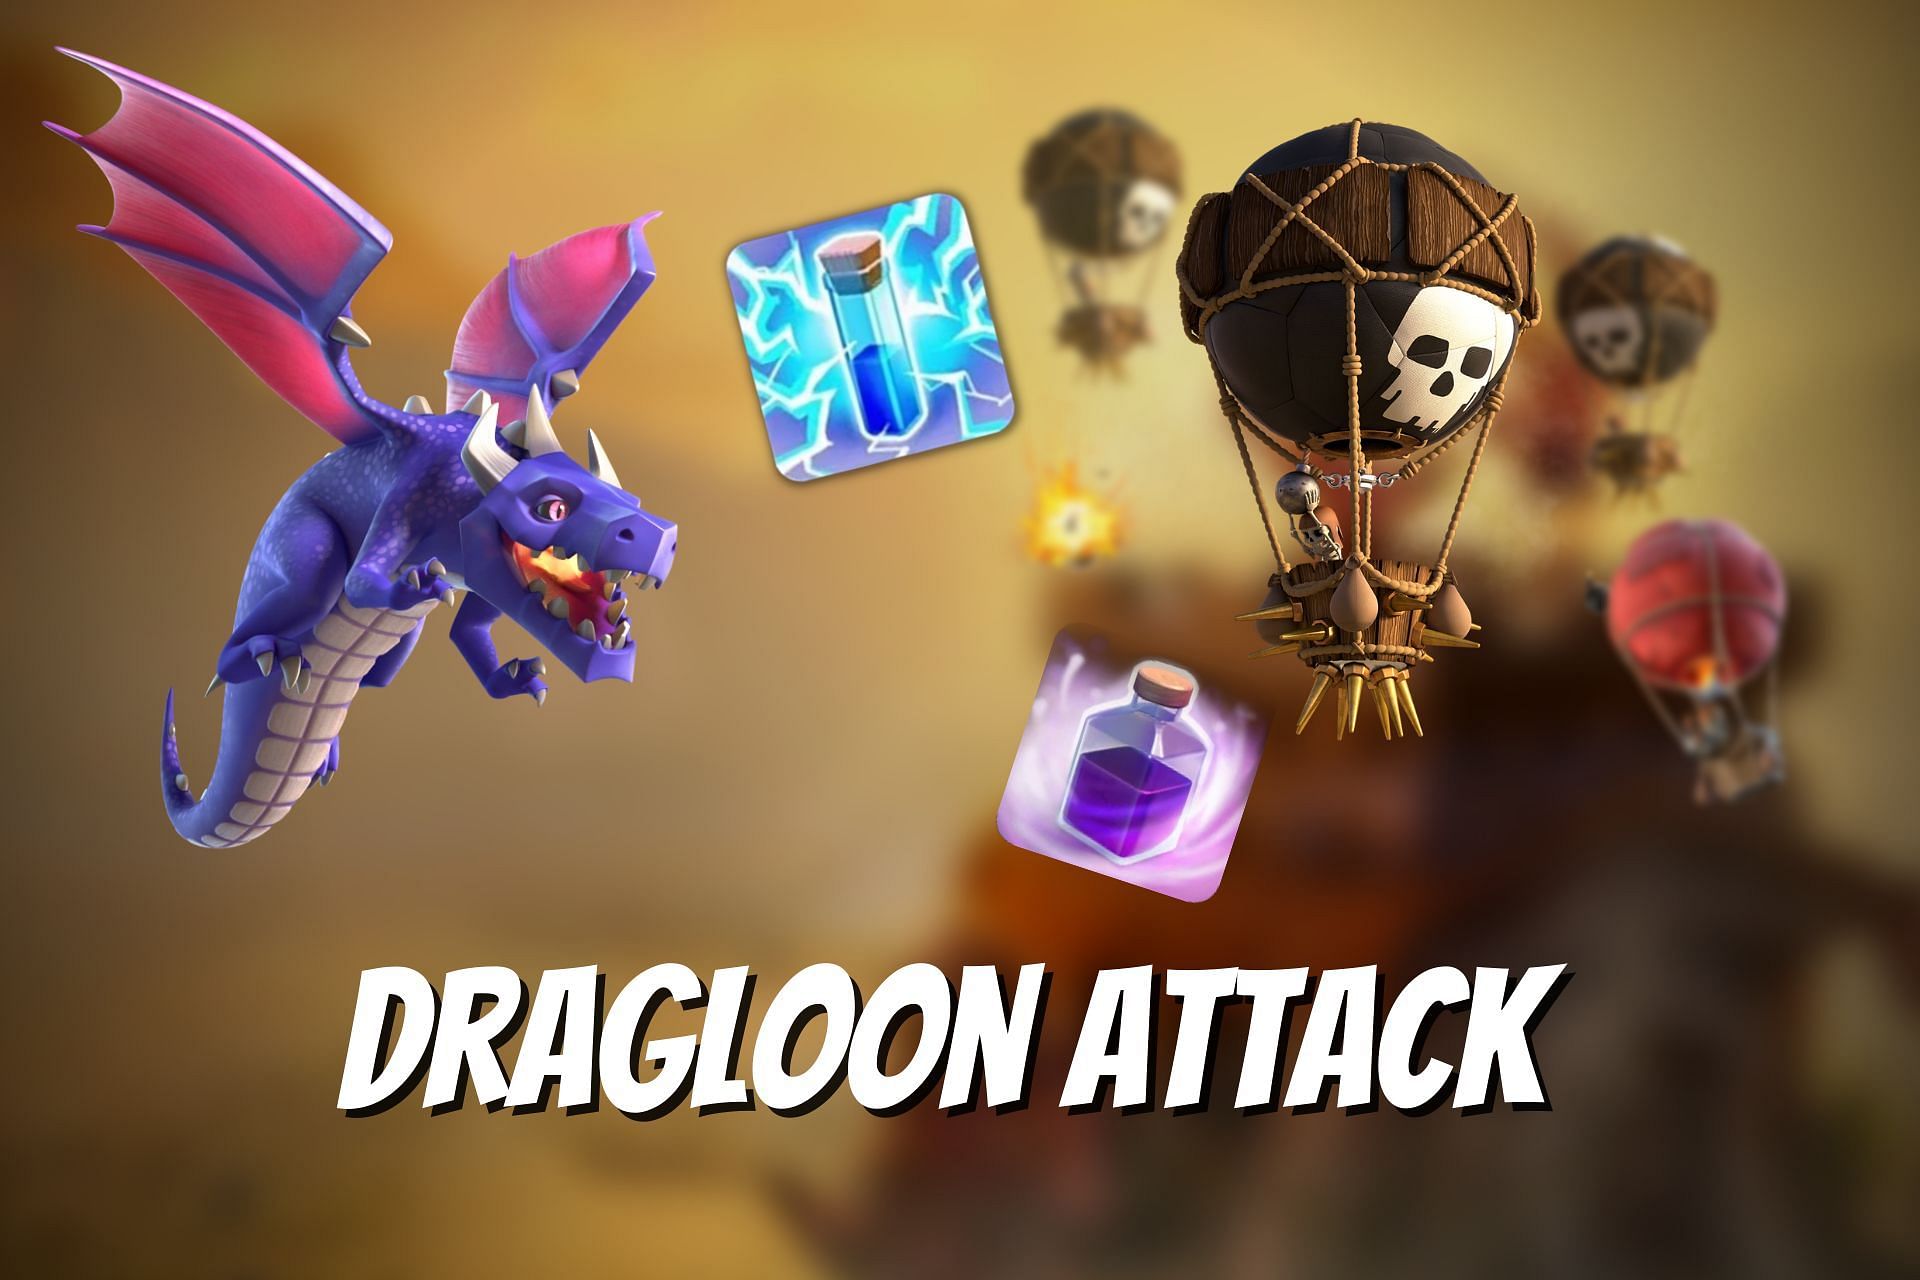 The DragLoon Attack Strategy in Clash of Clans (Image via Sportskeeda)